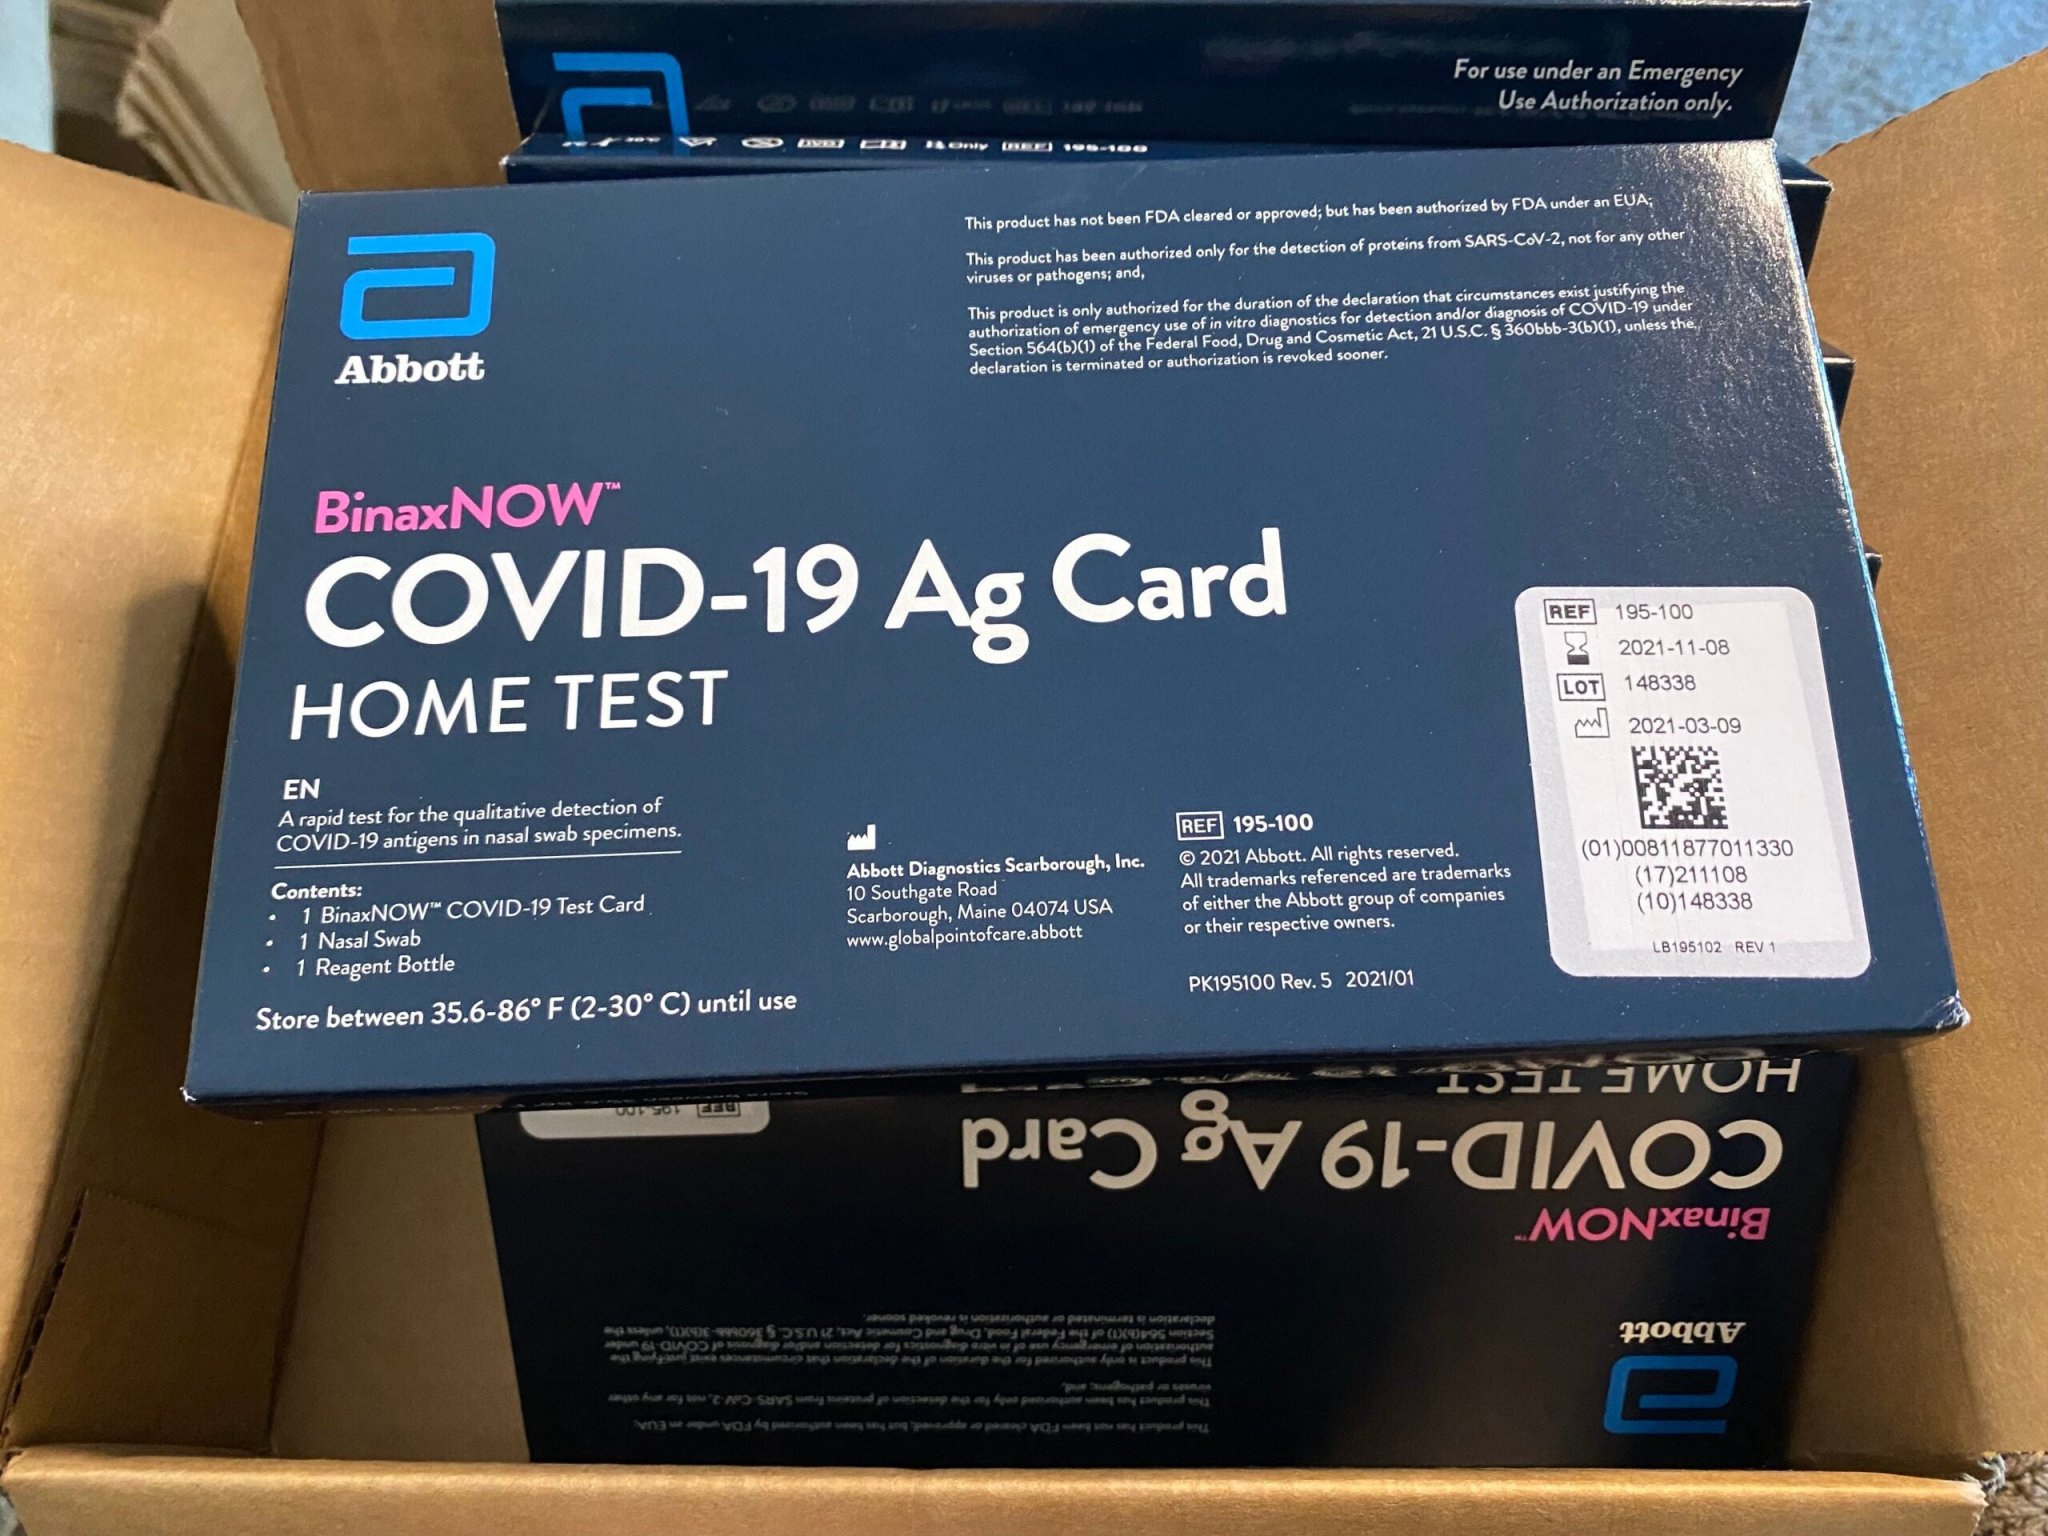 International travelers catch a break as FDA extends expiration date for at-home COVID-19 test